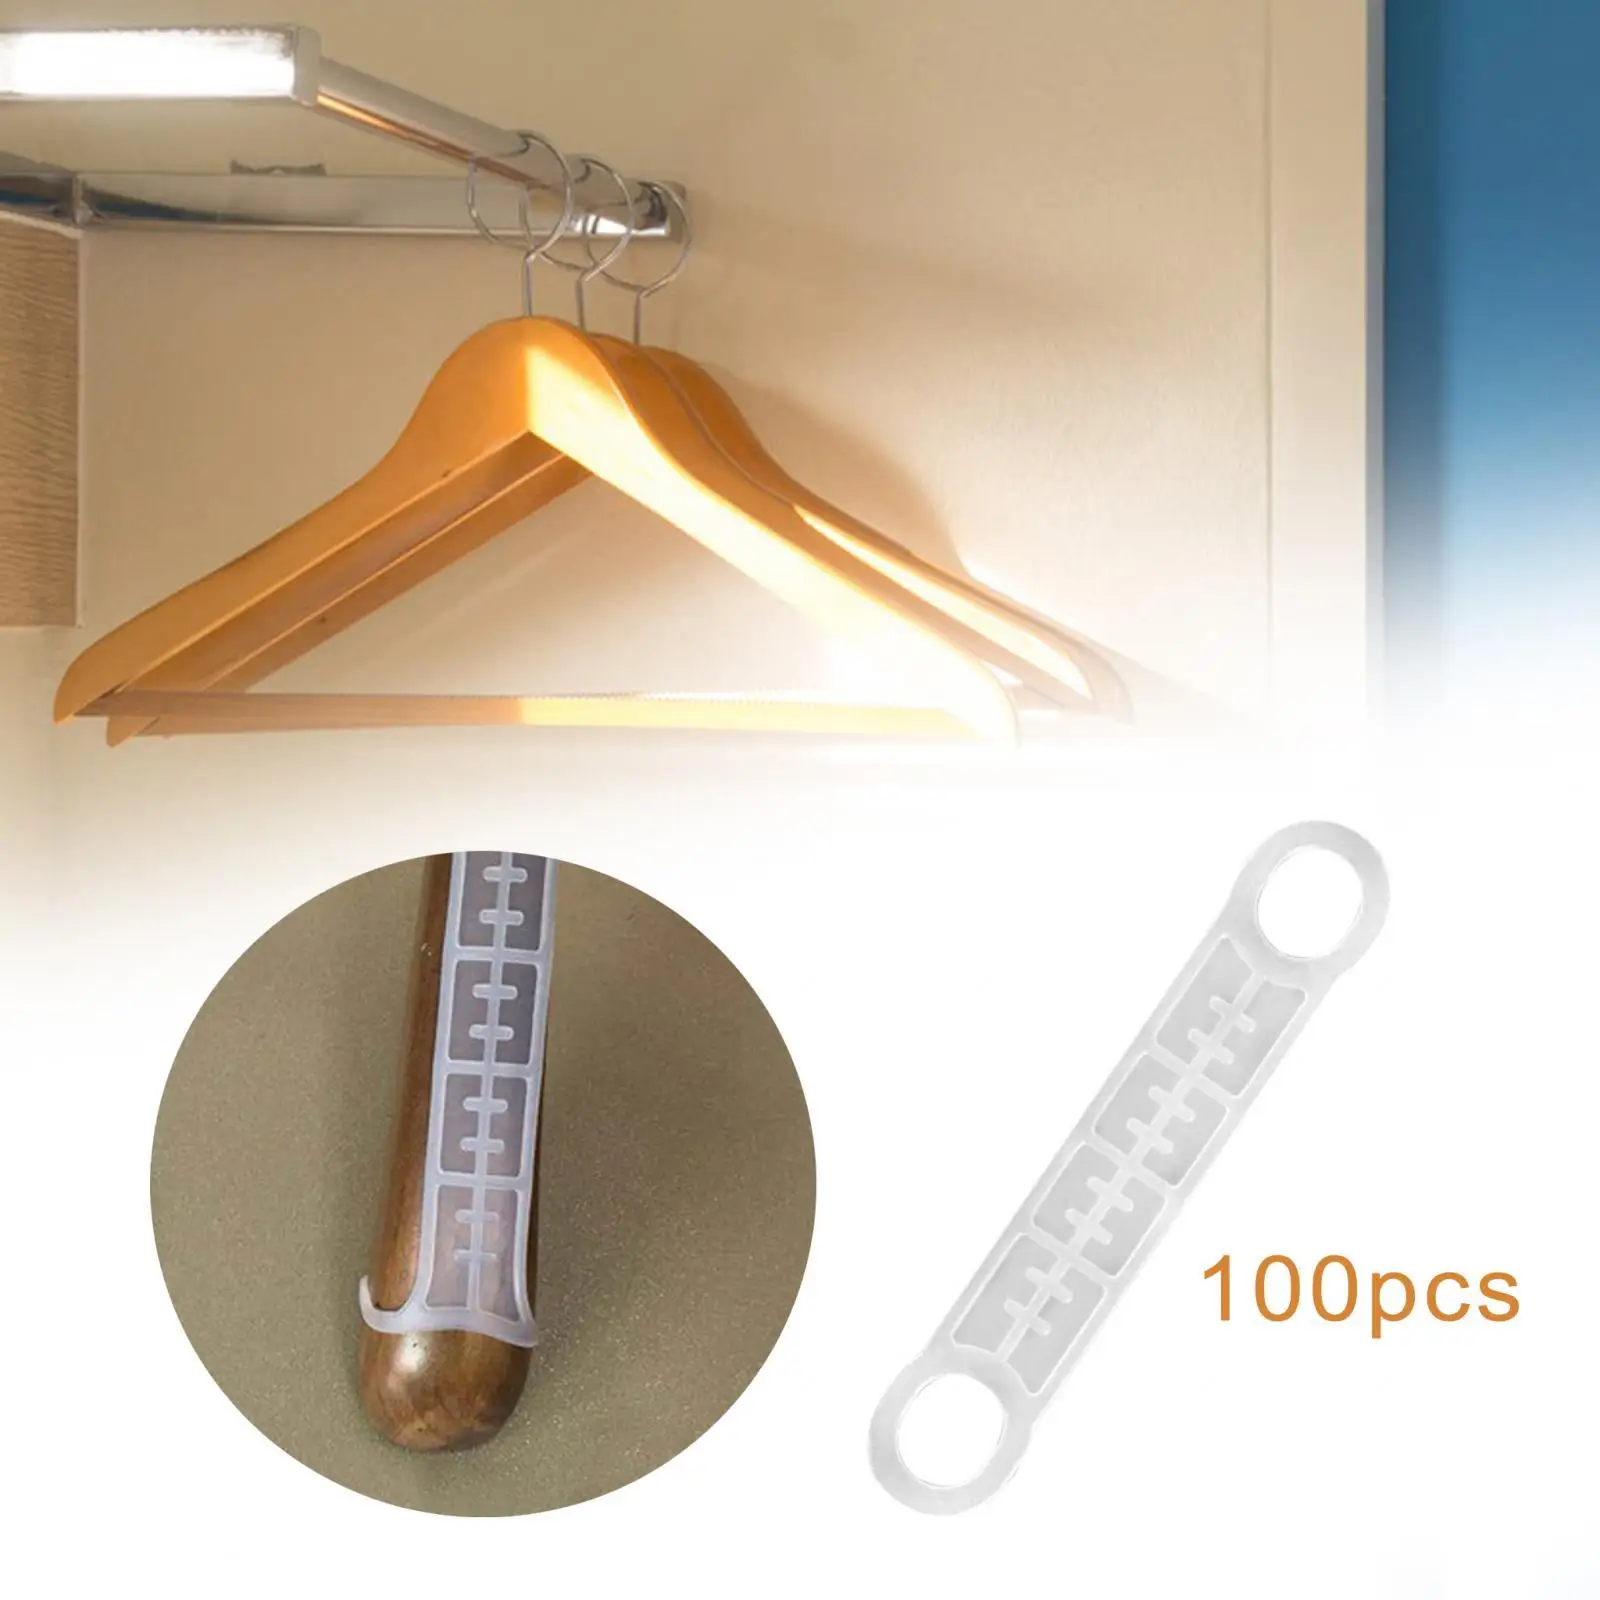 100Pcs Clothes Hanger Grips Nonslip Clear Shoulder Strips for Clothes Hanging Accessories Home Clothing Stores Closet